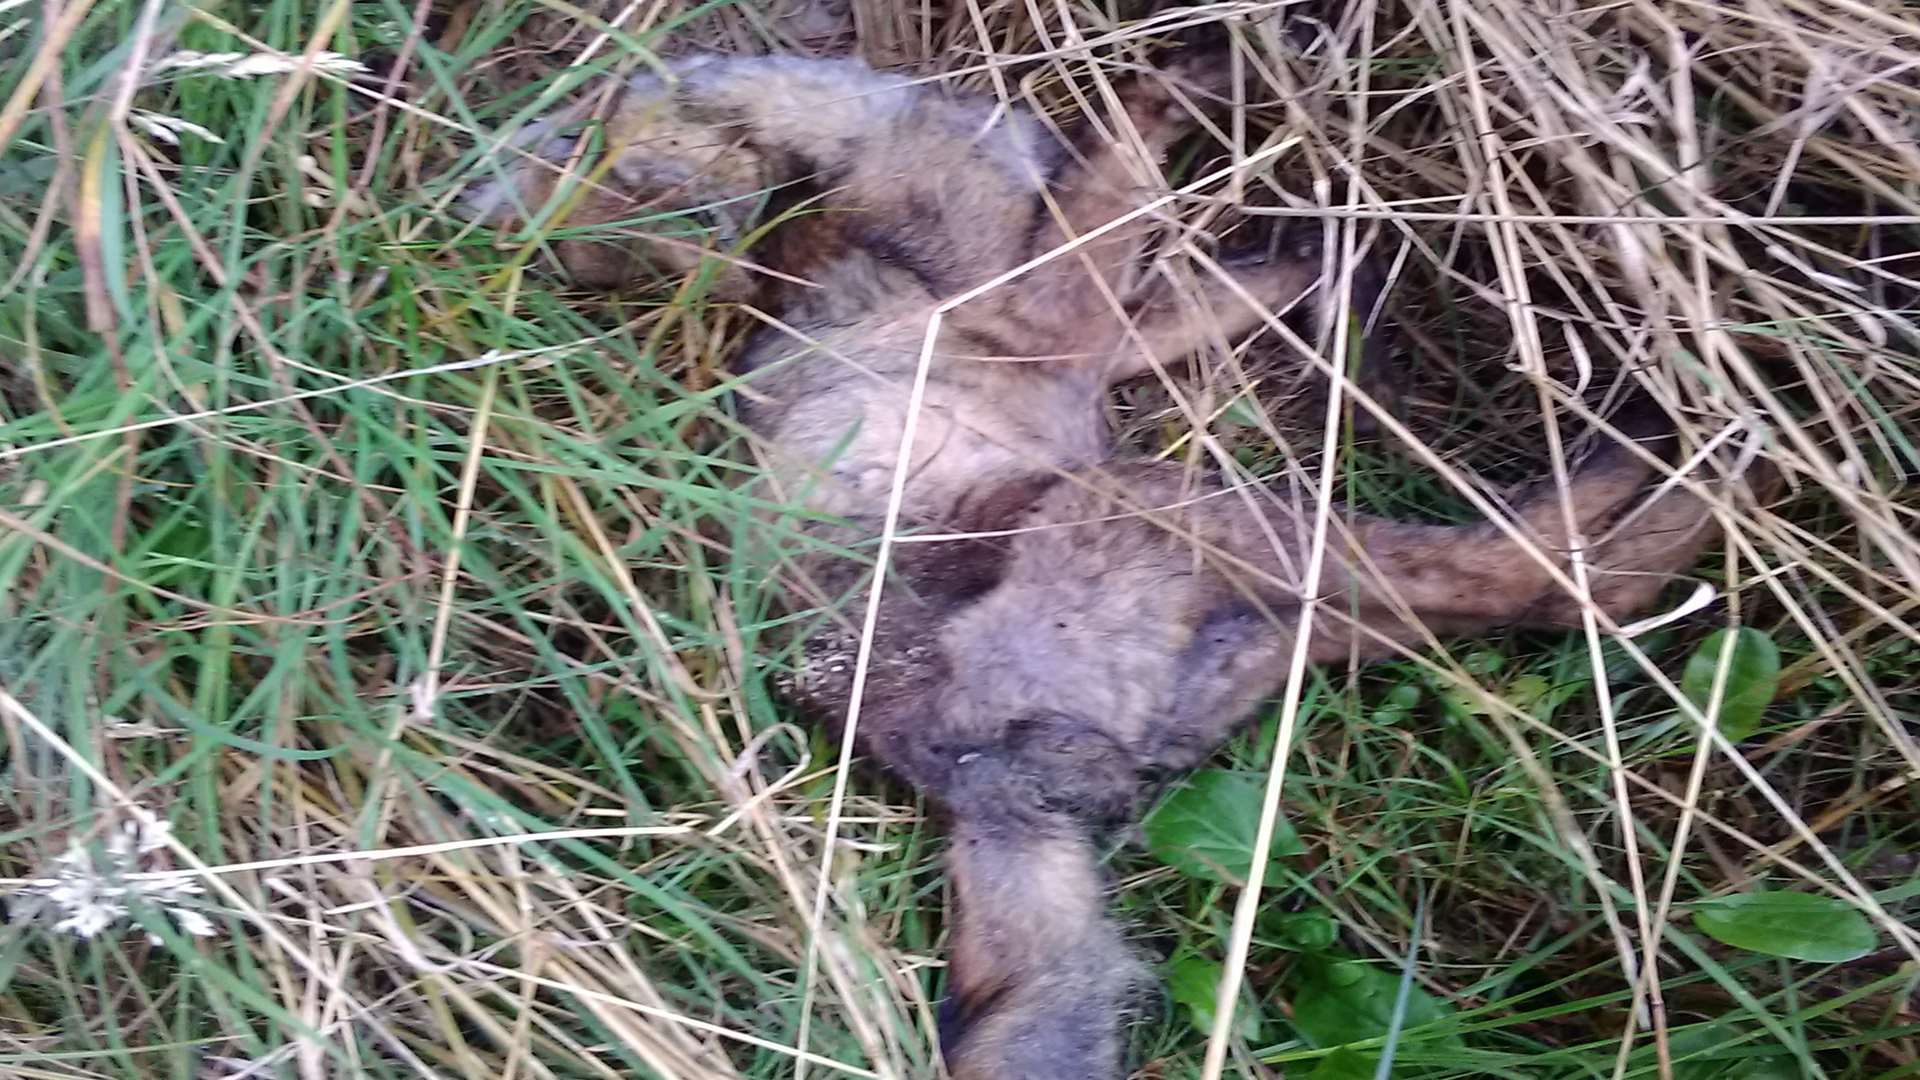 A fox is among the animals that have been killed in the area